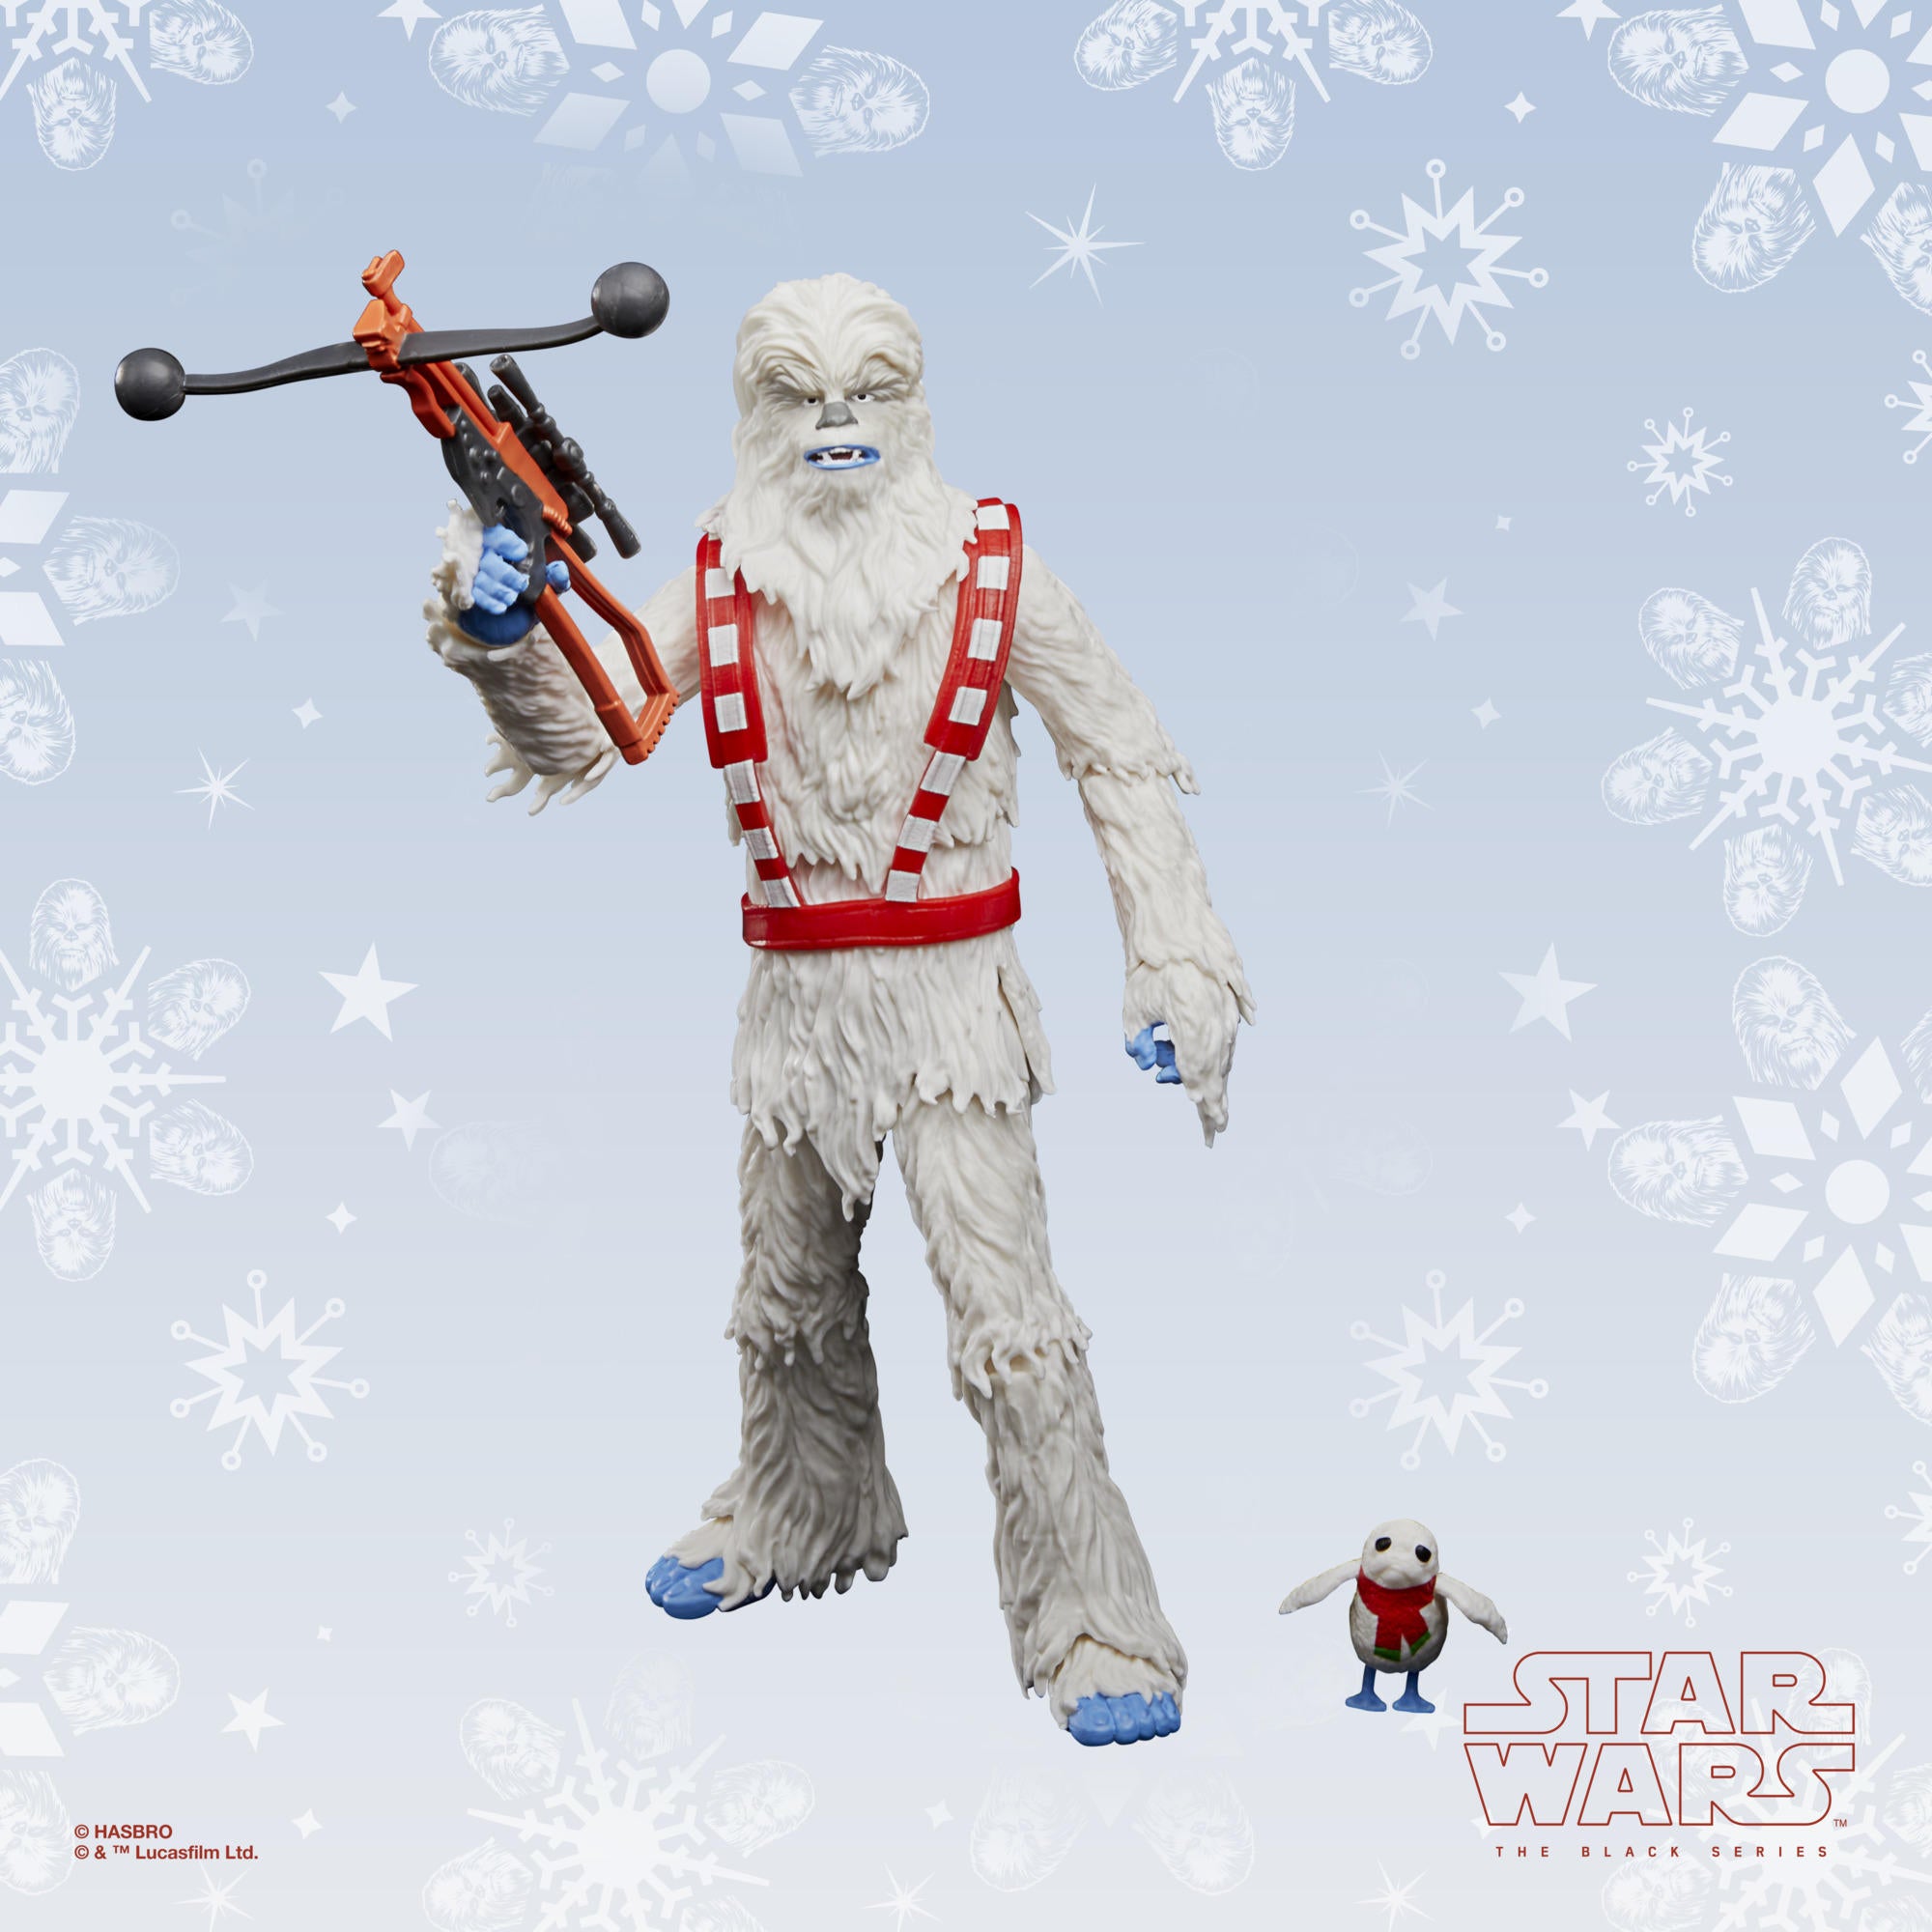 Star Wars Black Series Holiday 2022 Figures Revealed (Exclusive)